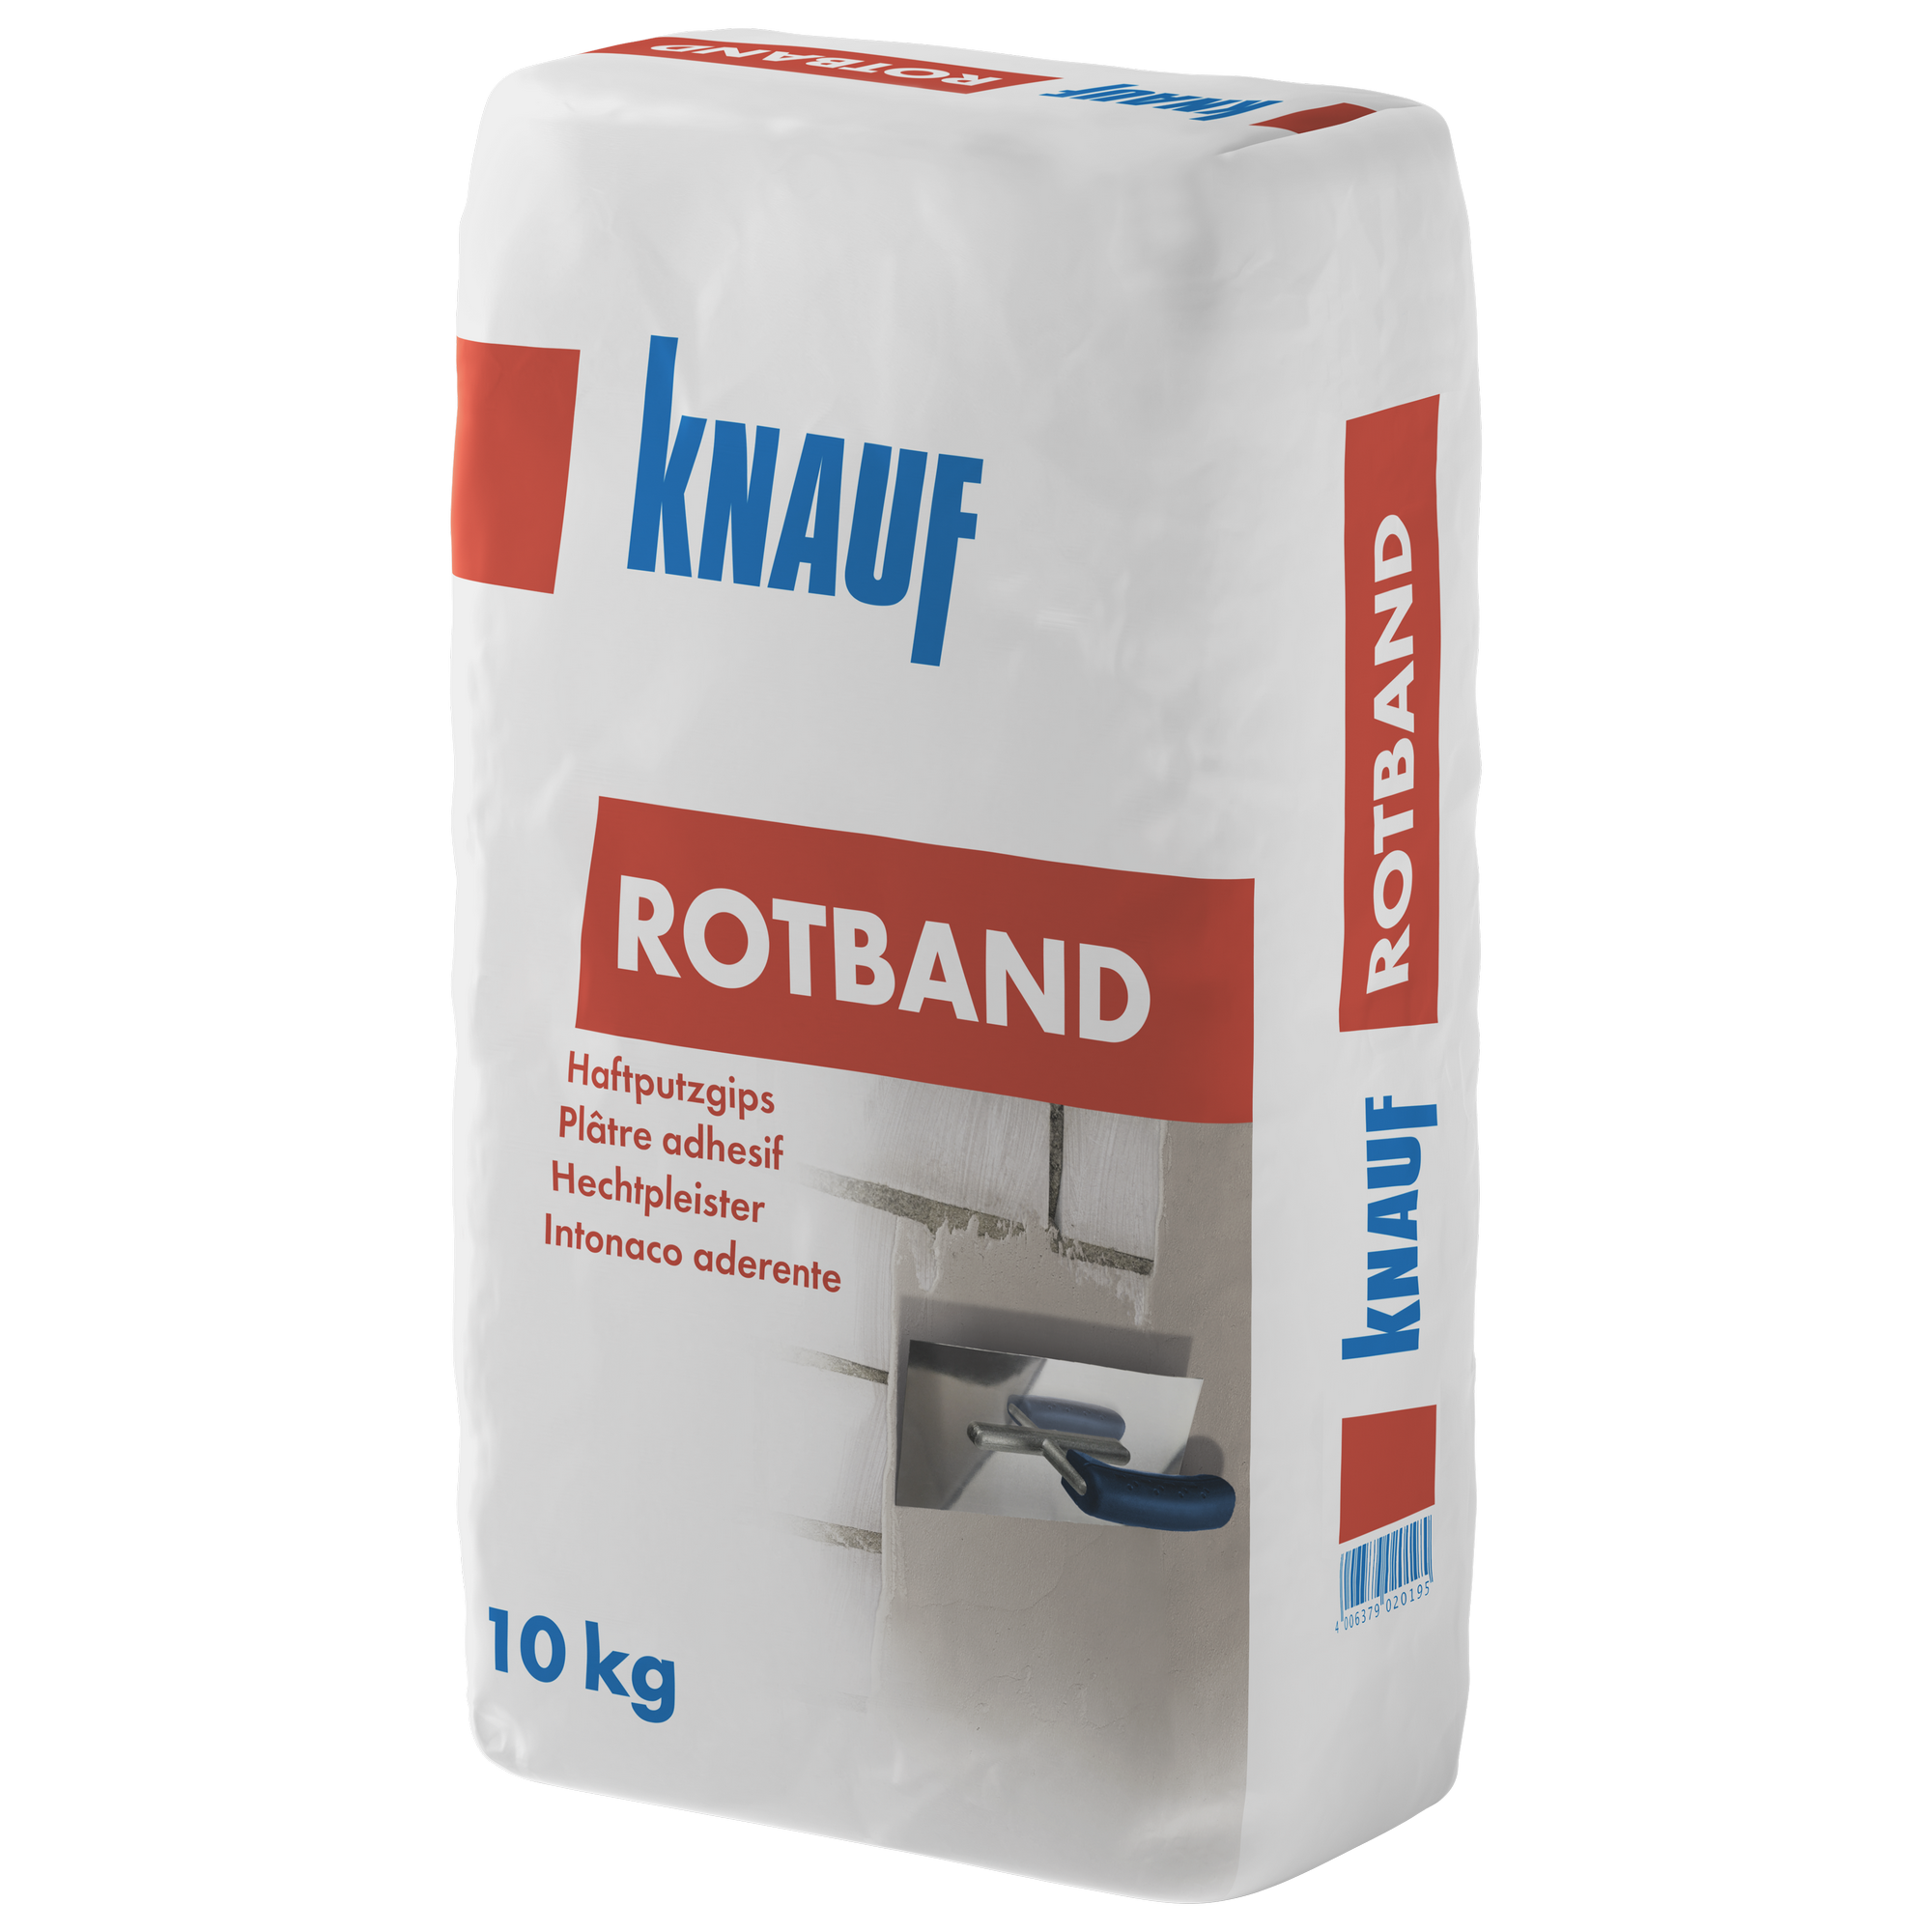 Haftputzgips 'Rotband' 10 kg + product picture